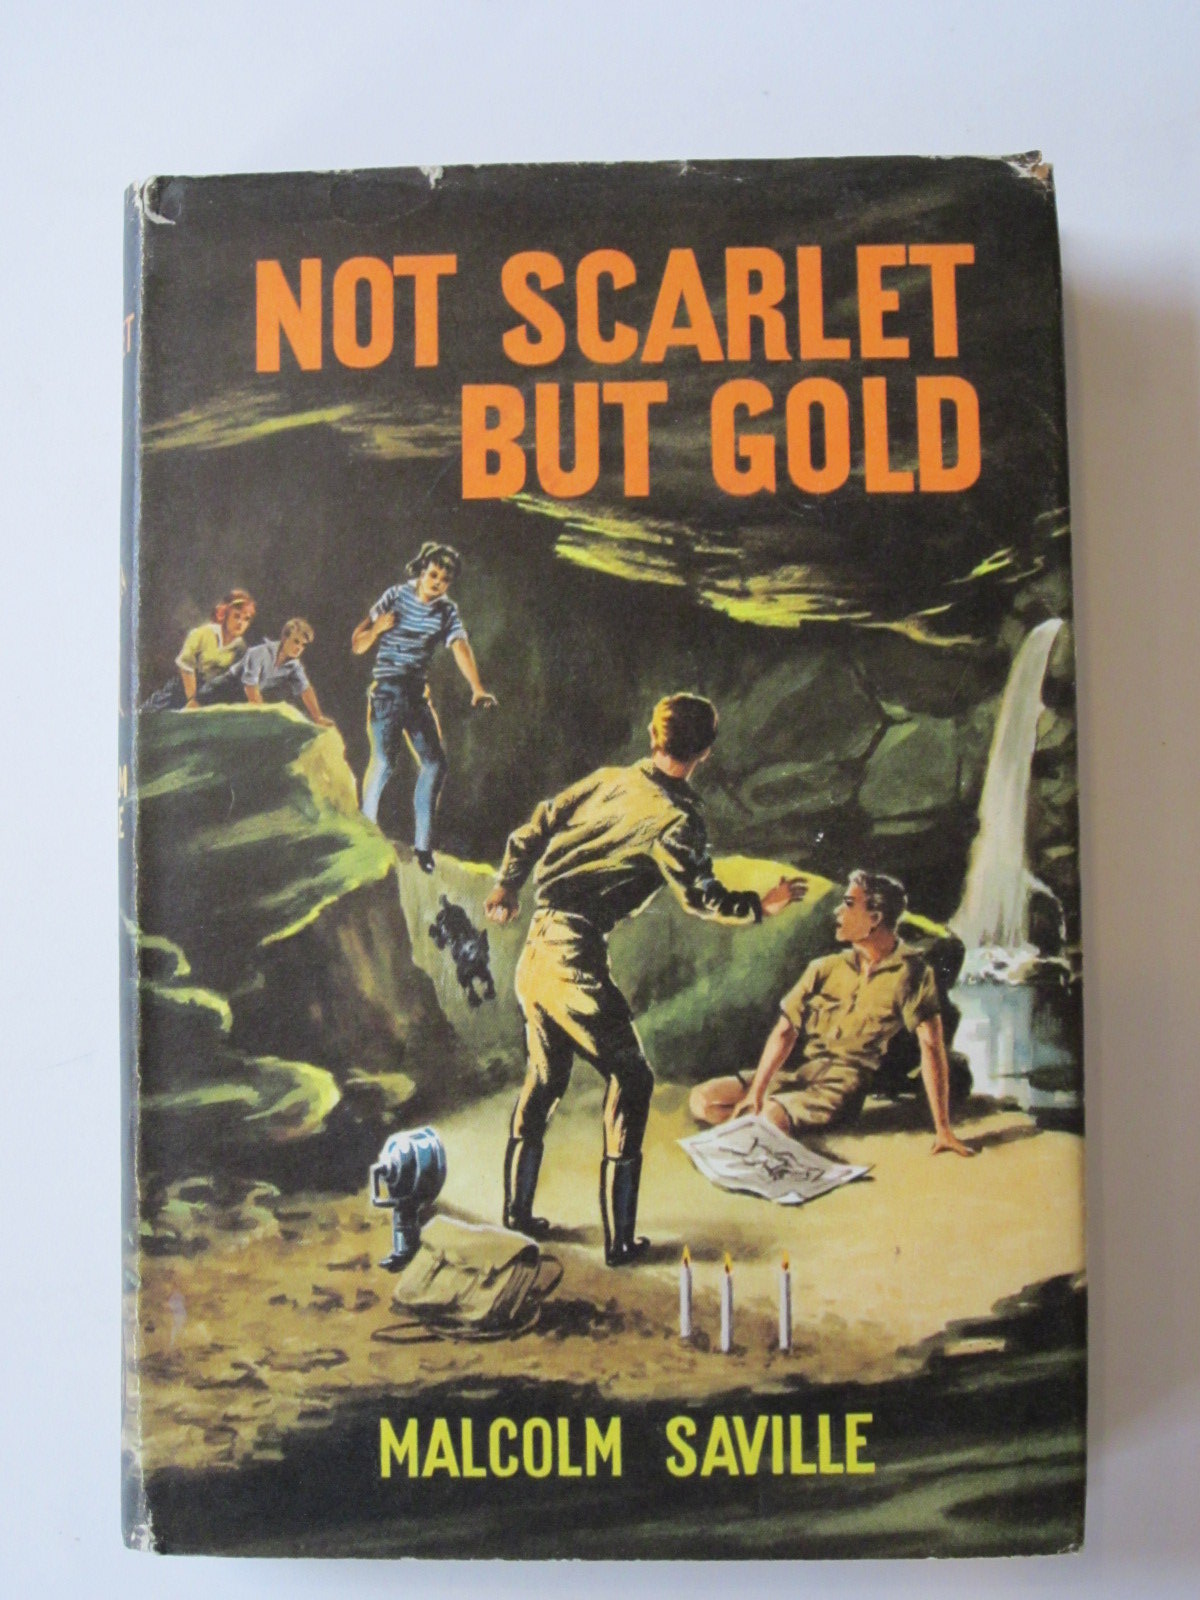 Cover of NOT SCARLET BUT GOLD by Malcolm Saville